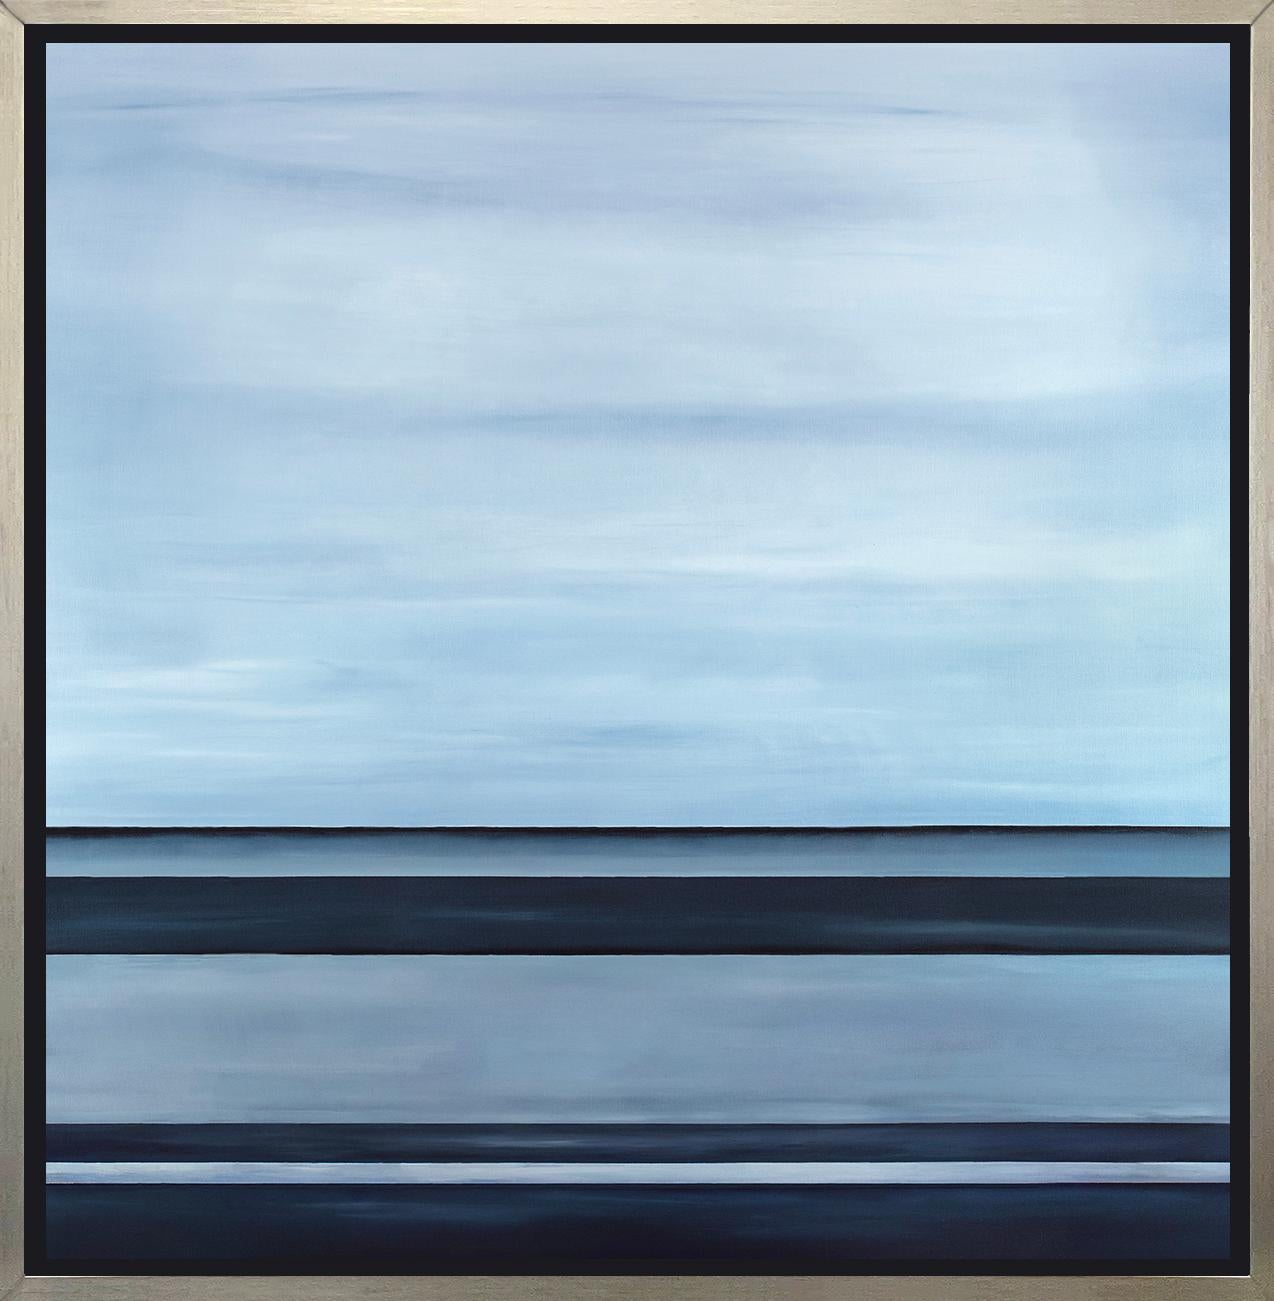 Tony Iadicicco Abstract Print - "Lost at Sea, " Framed Limited Edition Giclee Print, 48" x 48"